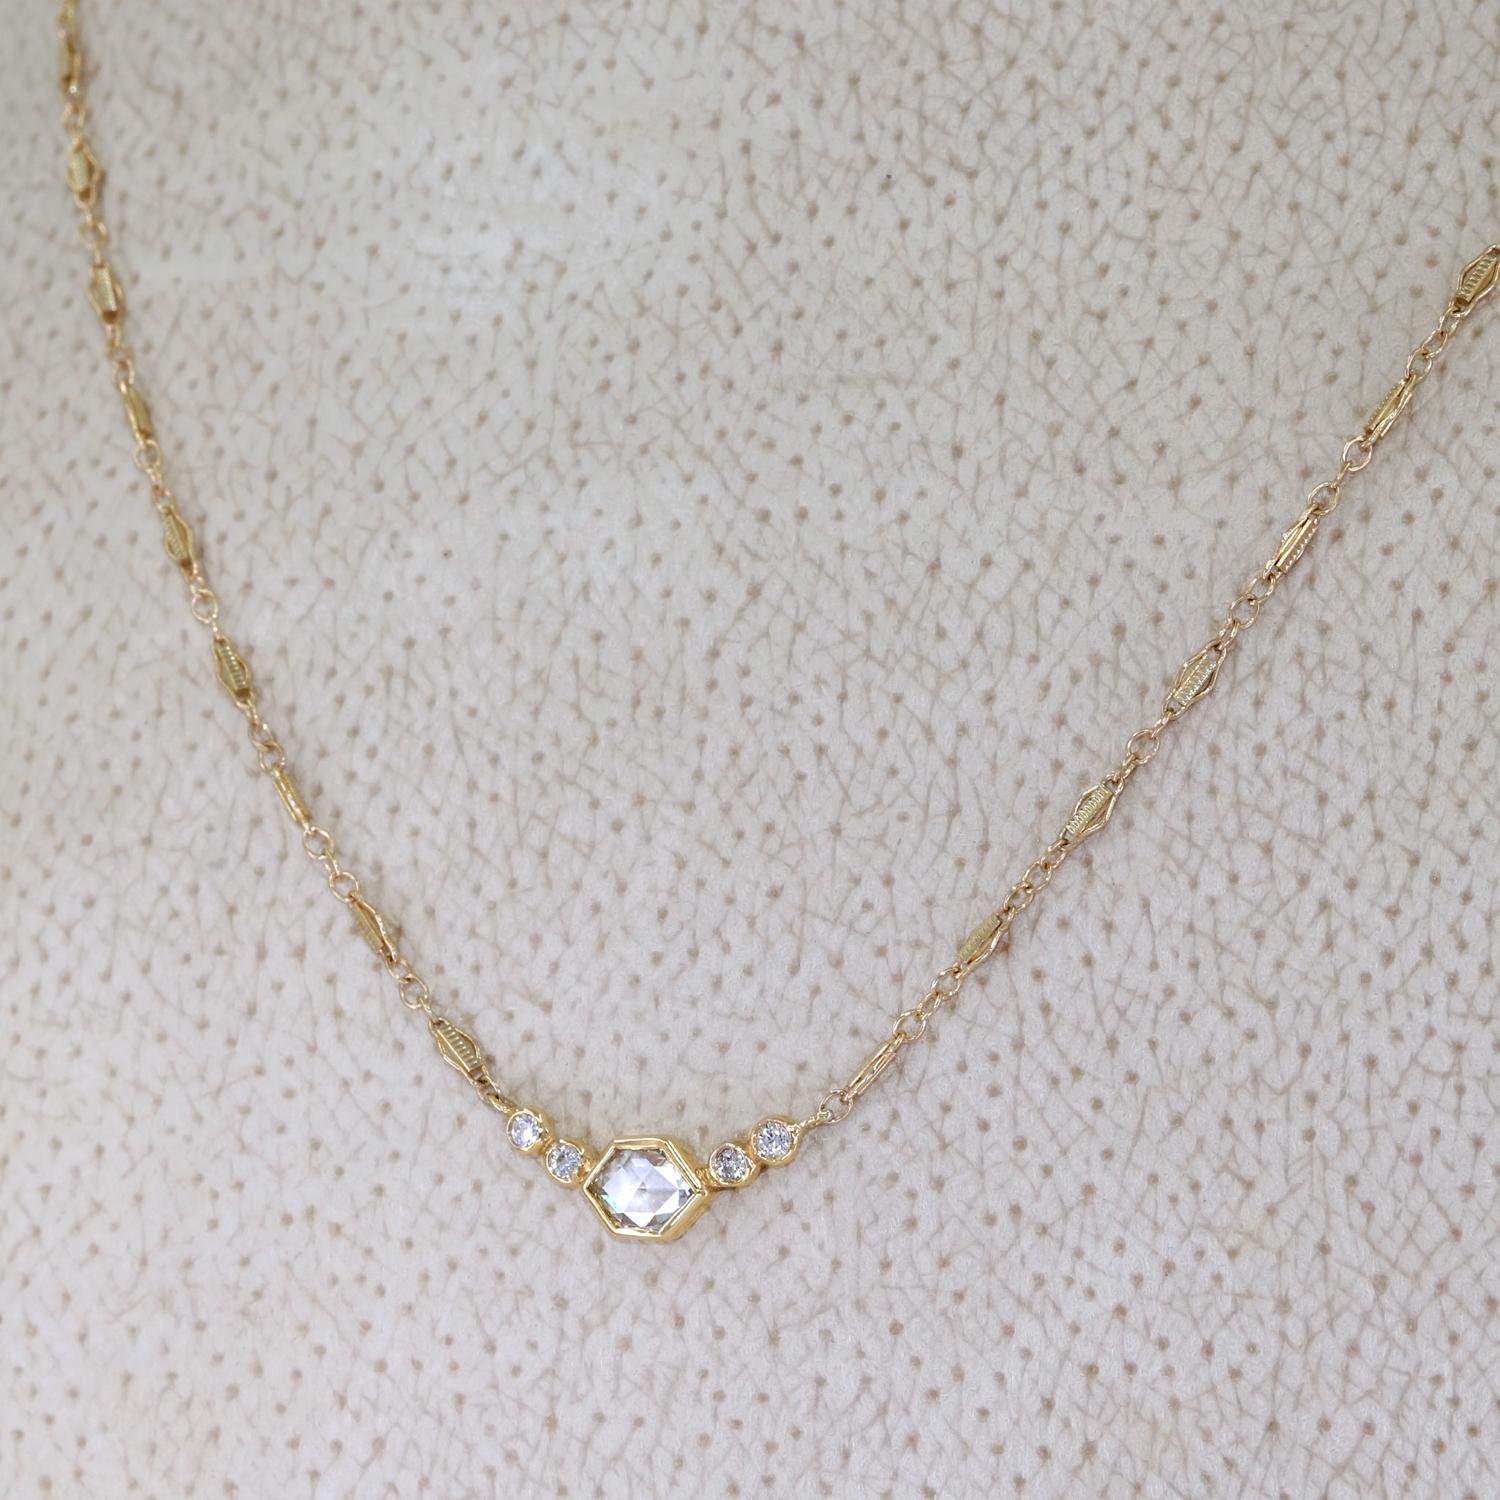 One of a Kind Deco Five Stone Necklace by jewelry designer Just Jules handmade in 14k yellow gold featuring a vibrant, shimmering 0.30 carat hexagonal rose-cut diamond flanked by four round brilliant-cut diamonds totaling 0.08 carats, individually